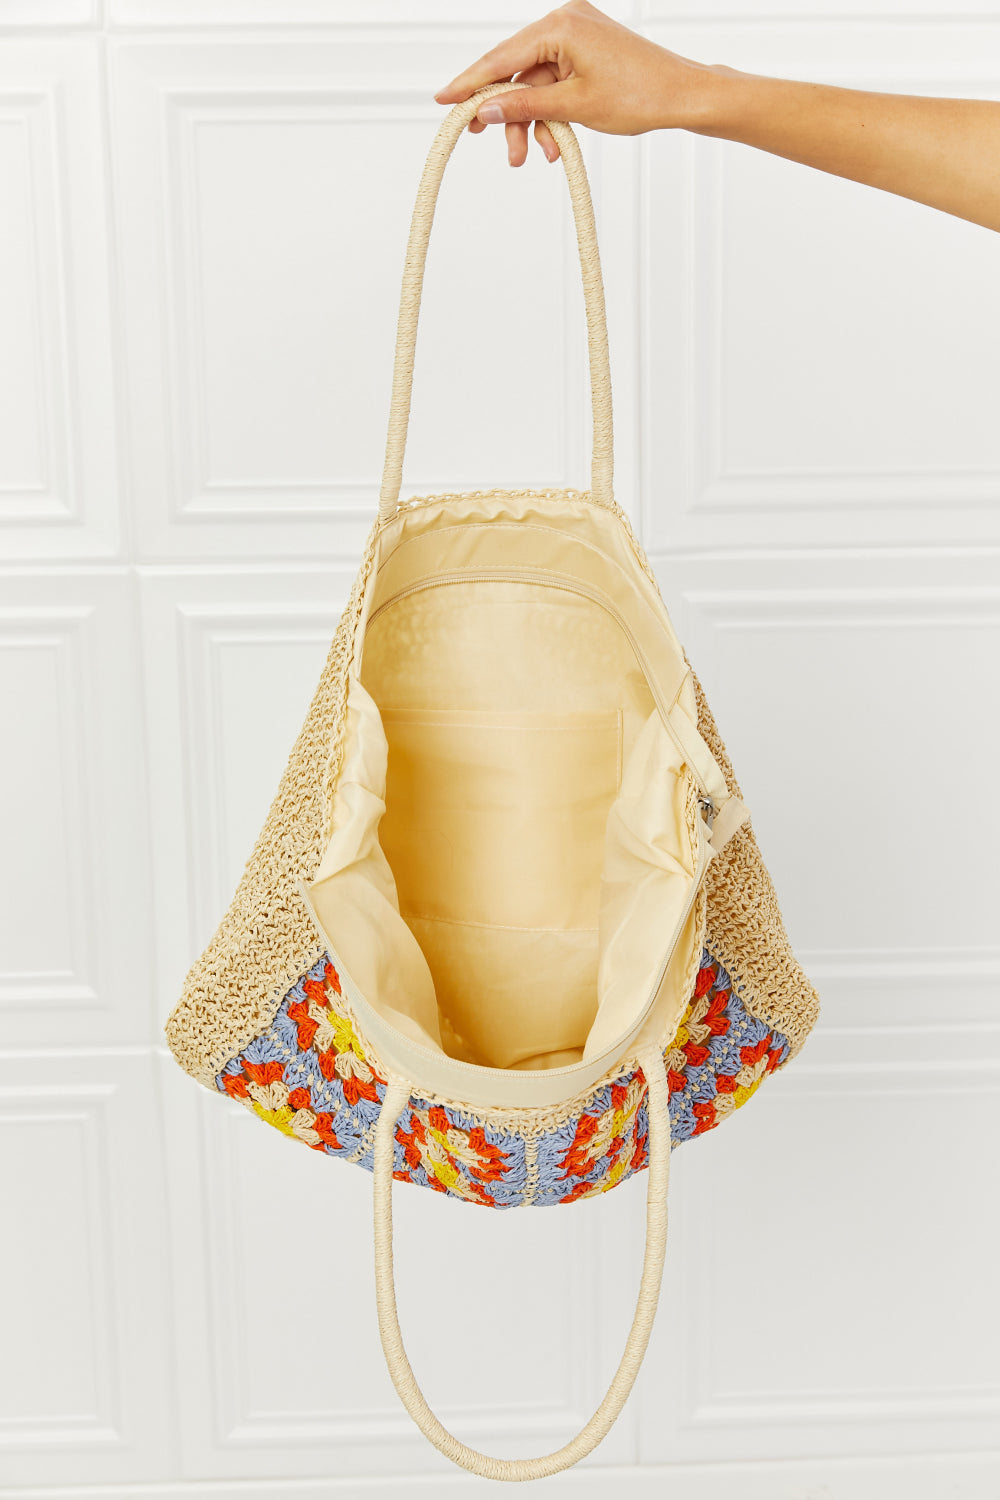 Fame Off The Coast Straw Tote Bag - Pacis and Pearls